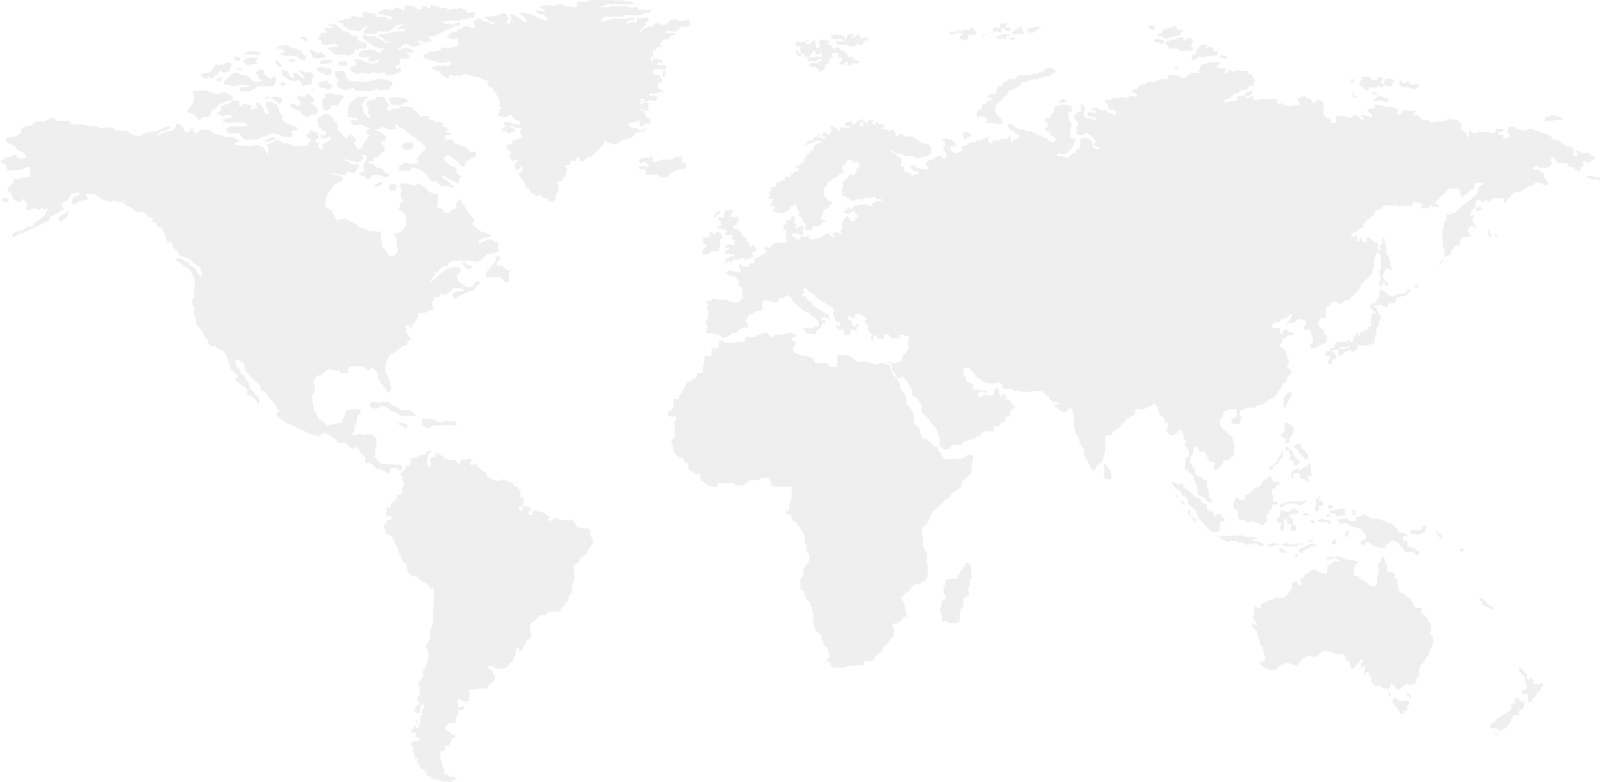 background image of a world map